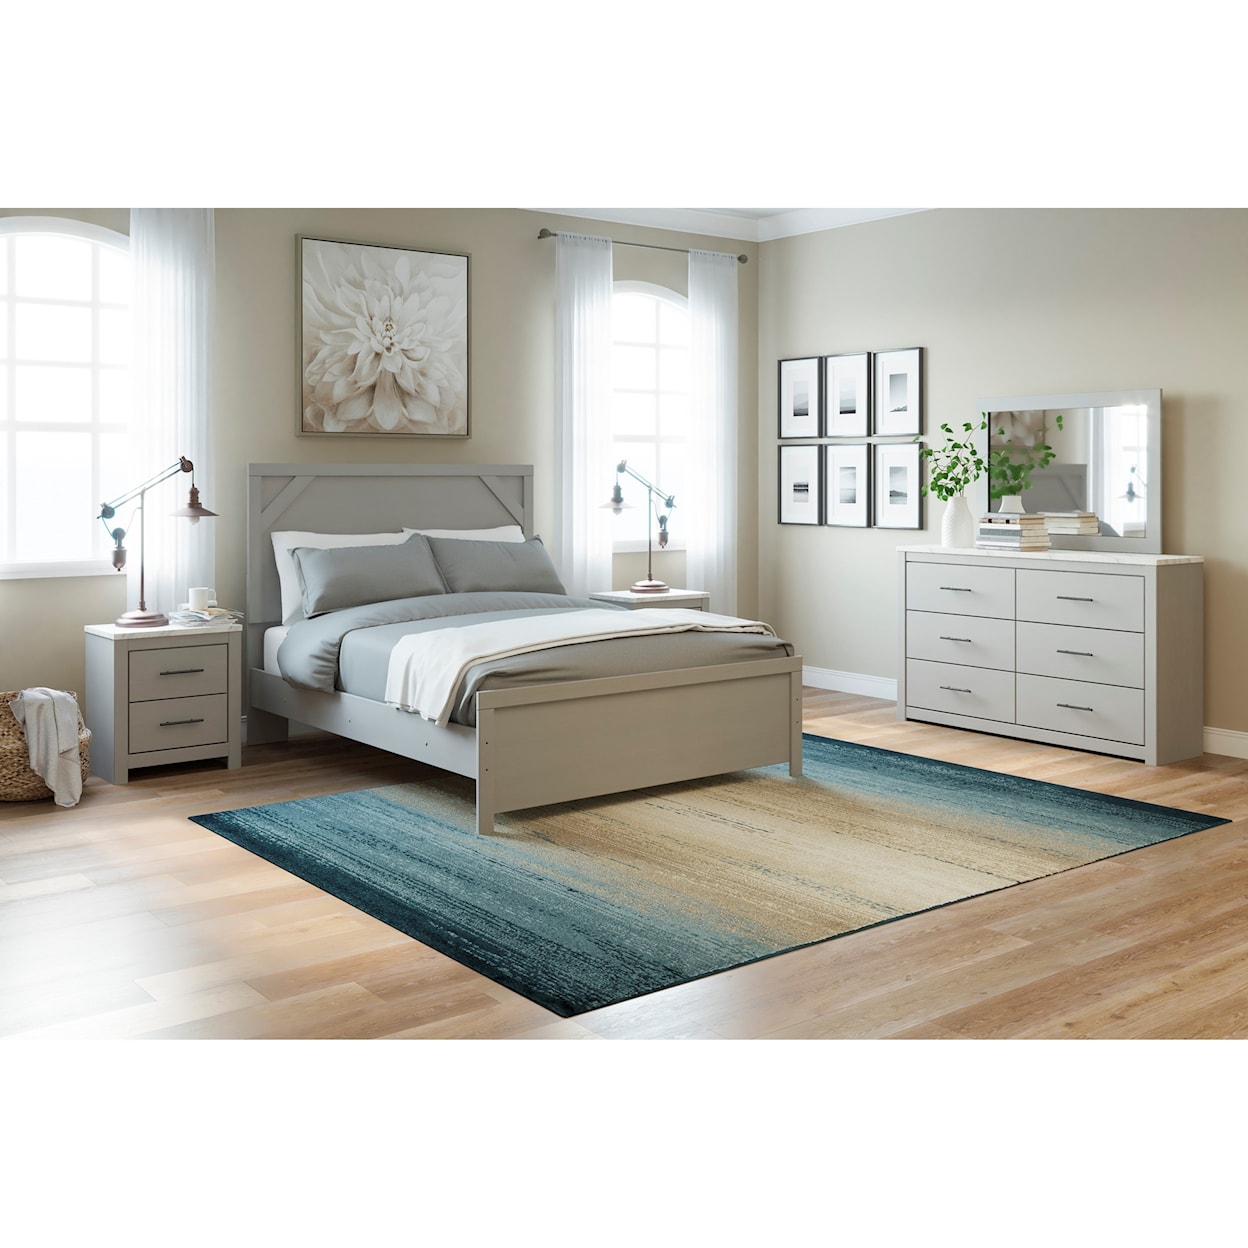 Signature Design by Ashley Cottonburg Queen Bedroom Group